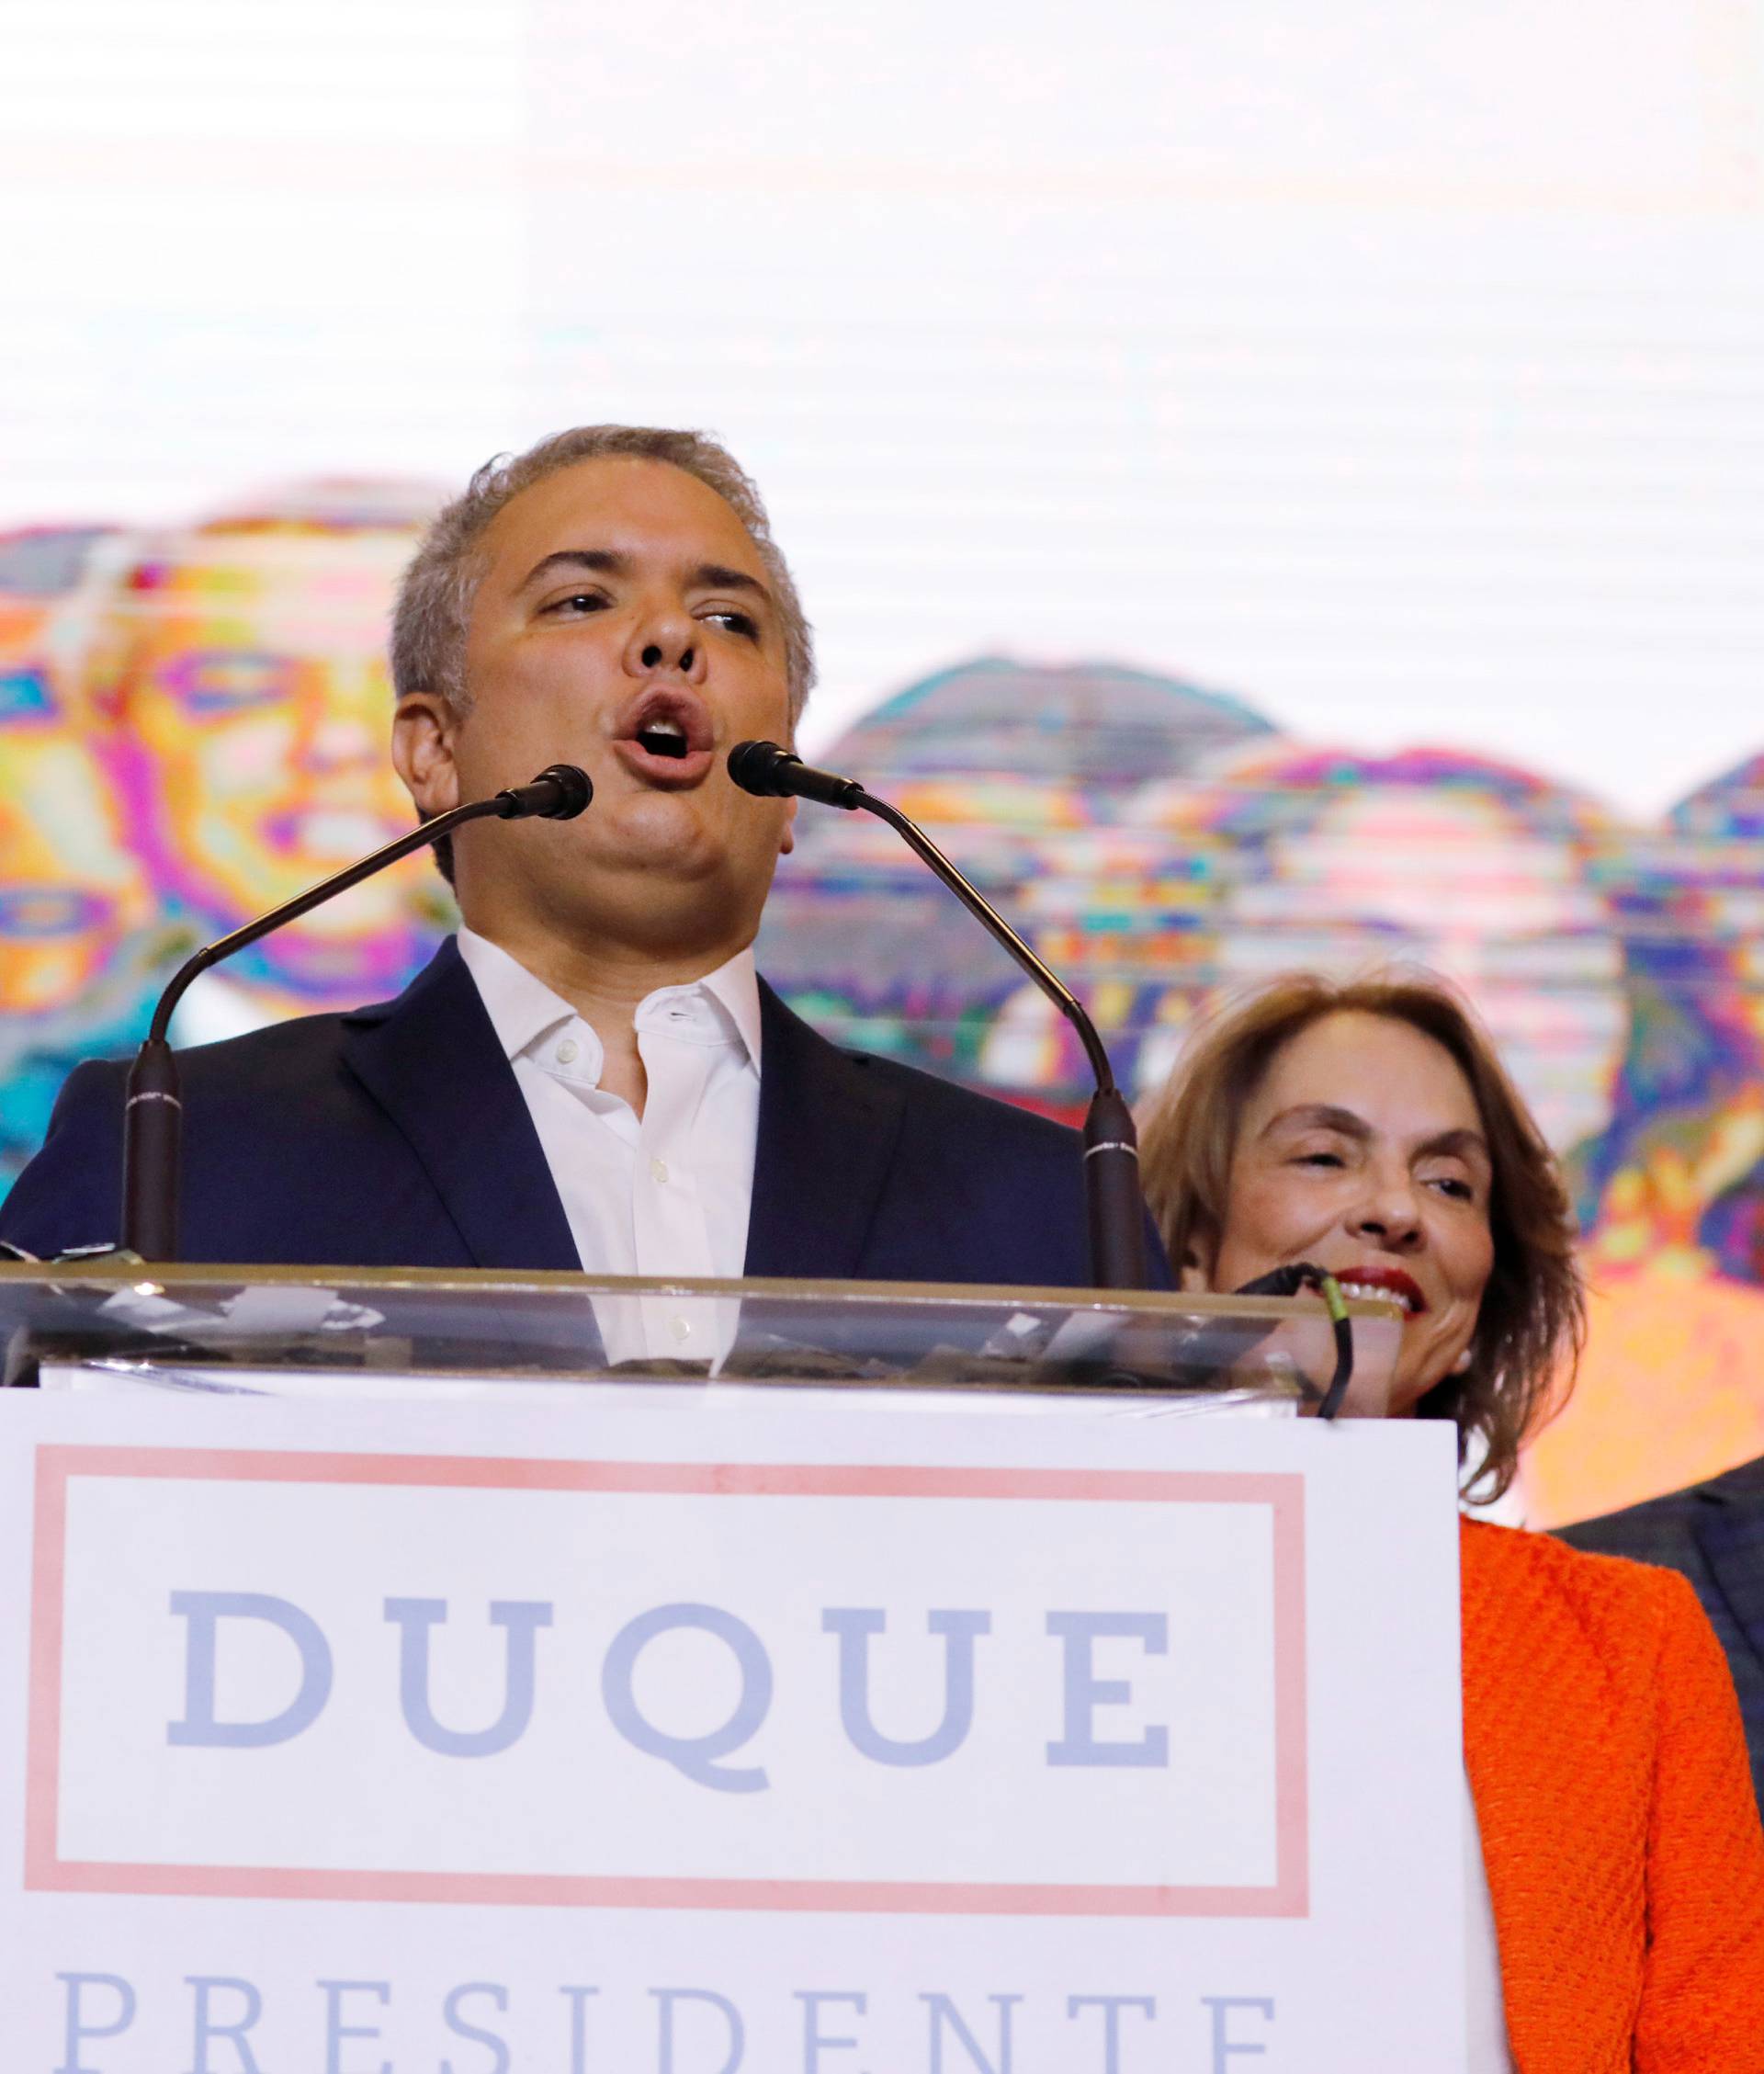 Presidential candidate Duque speaks after winning the presidential election in Bogota